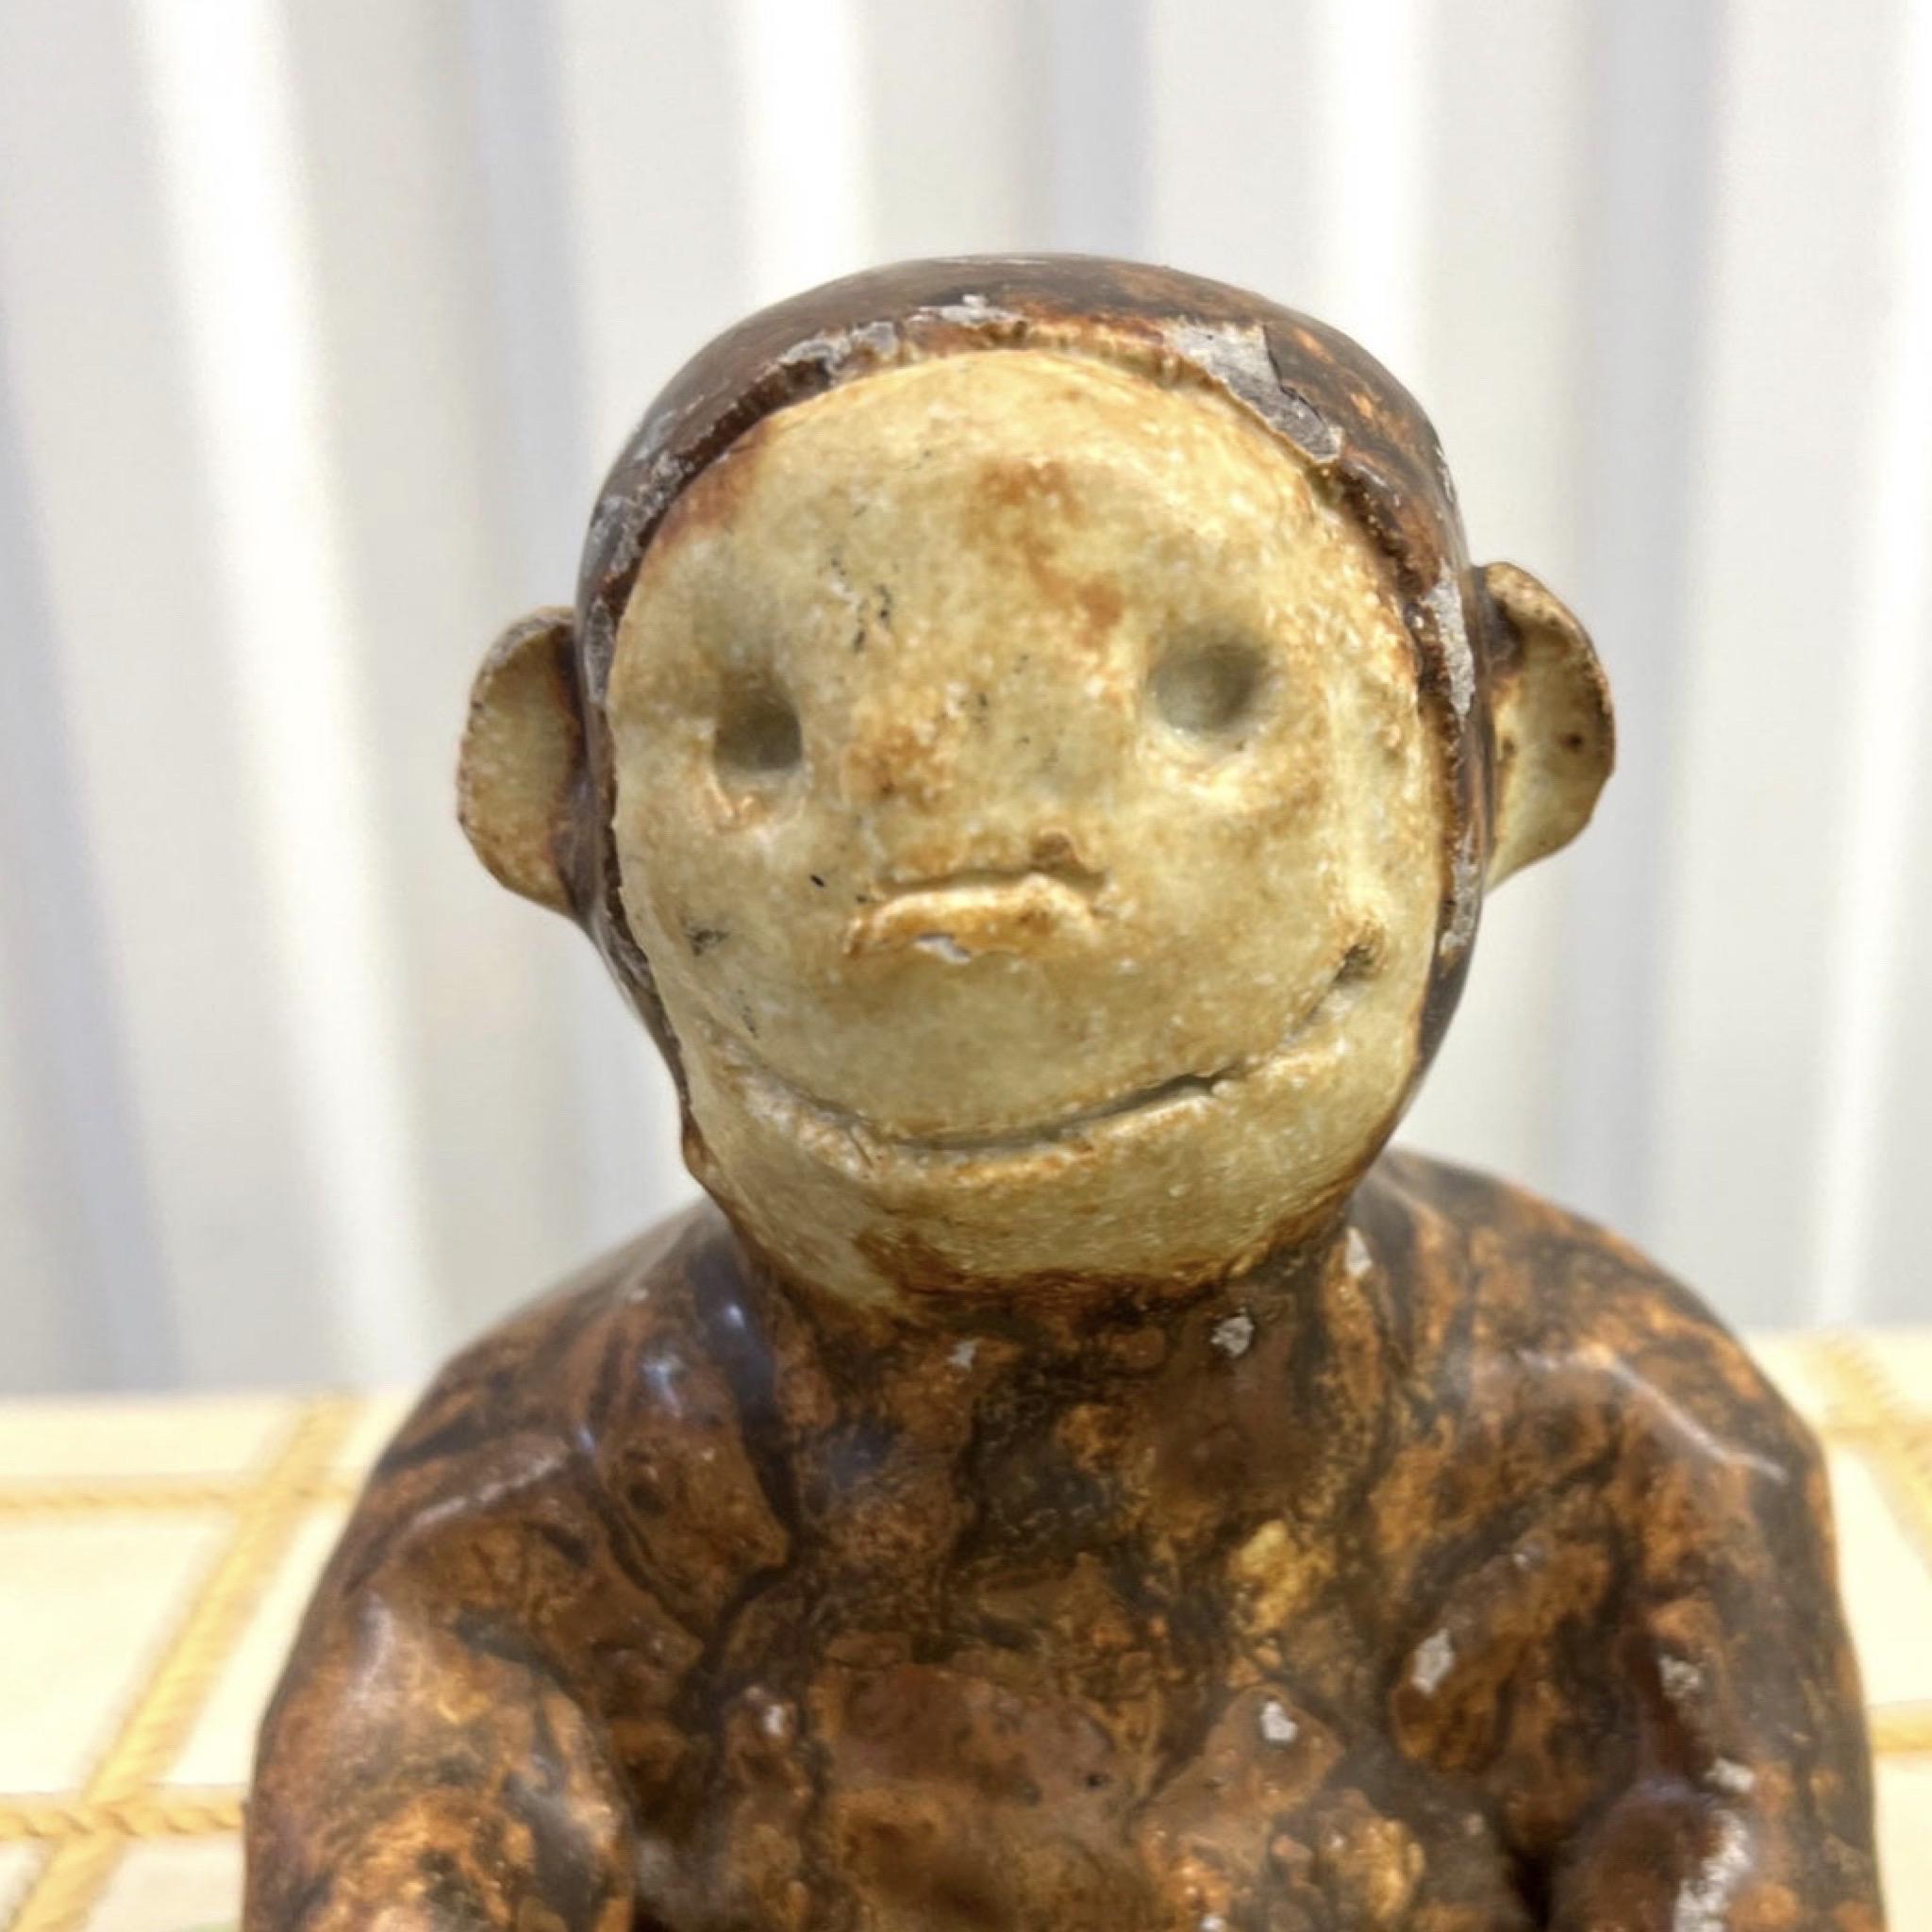 Vintage Folk Art brutalist Monkey sculpture. He is so cute and imperfect which makes him absolutely perfect to me. He is made of sculpted clay. This is a great example of 1960’s folk art.